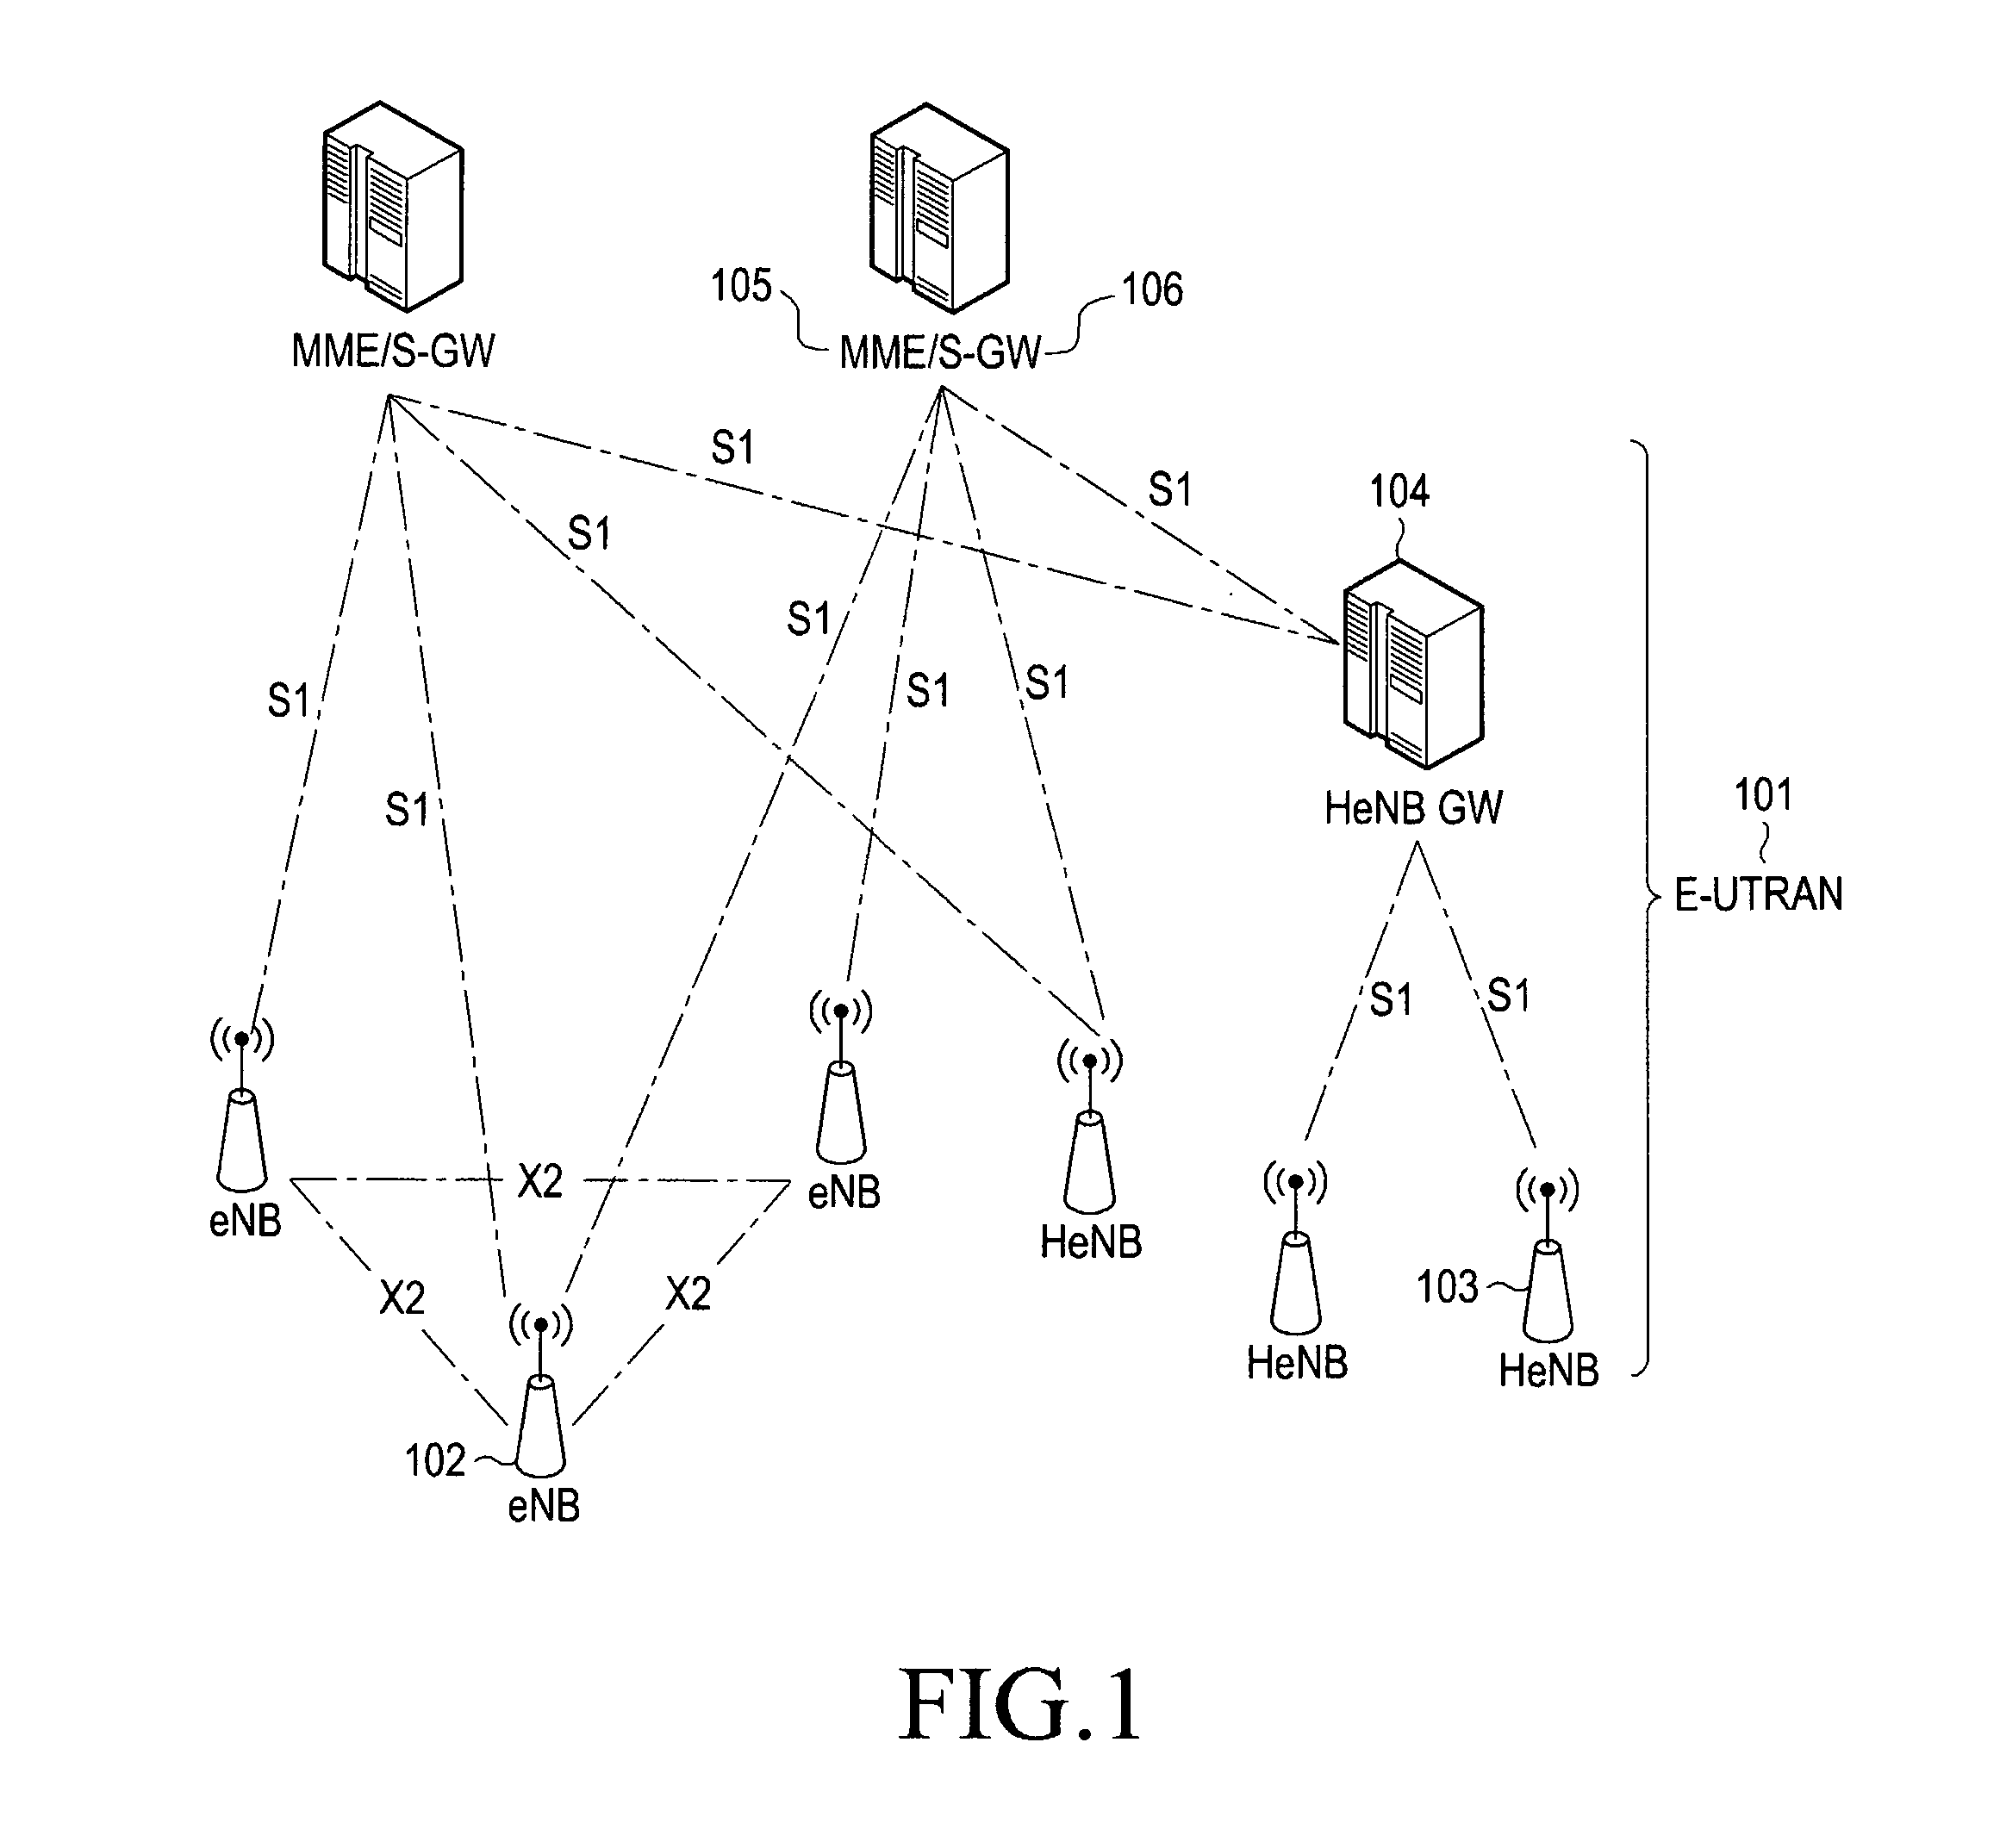 Method and apparatus for performing handover